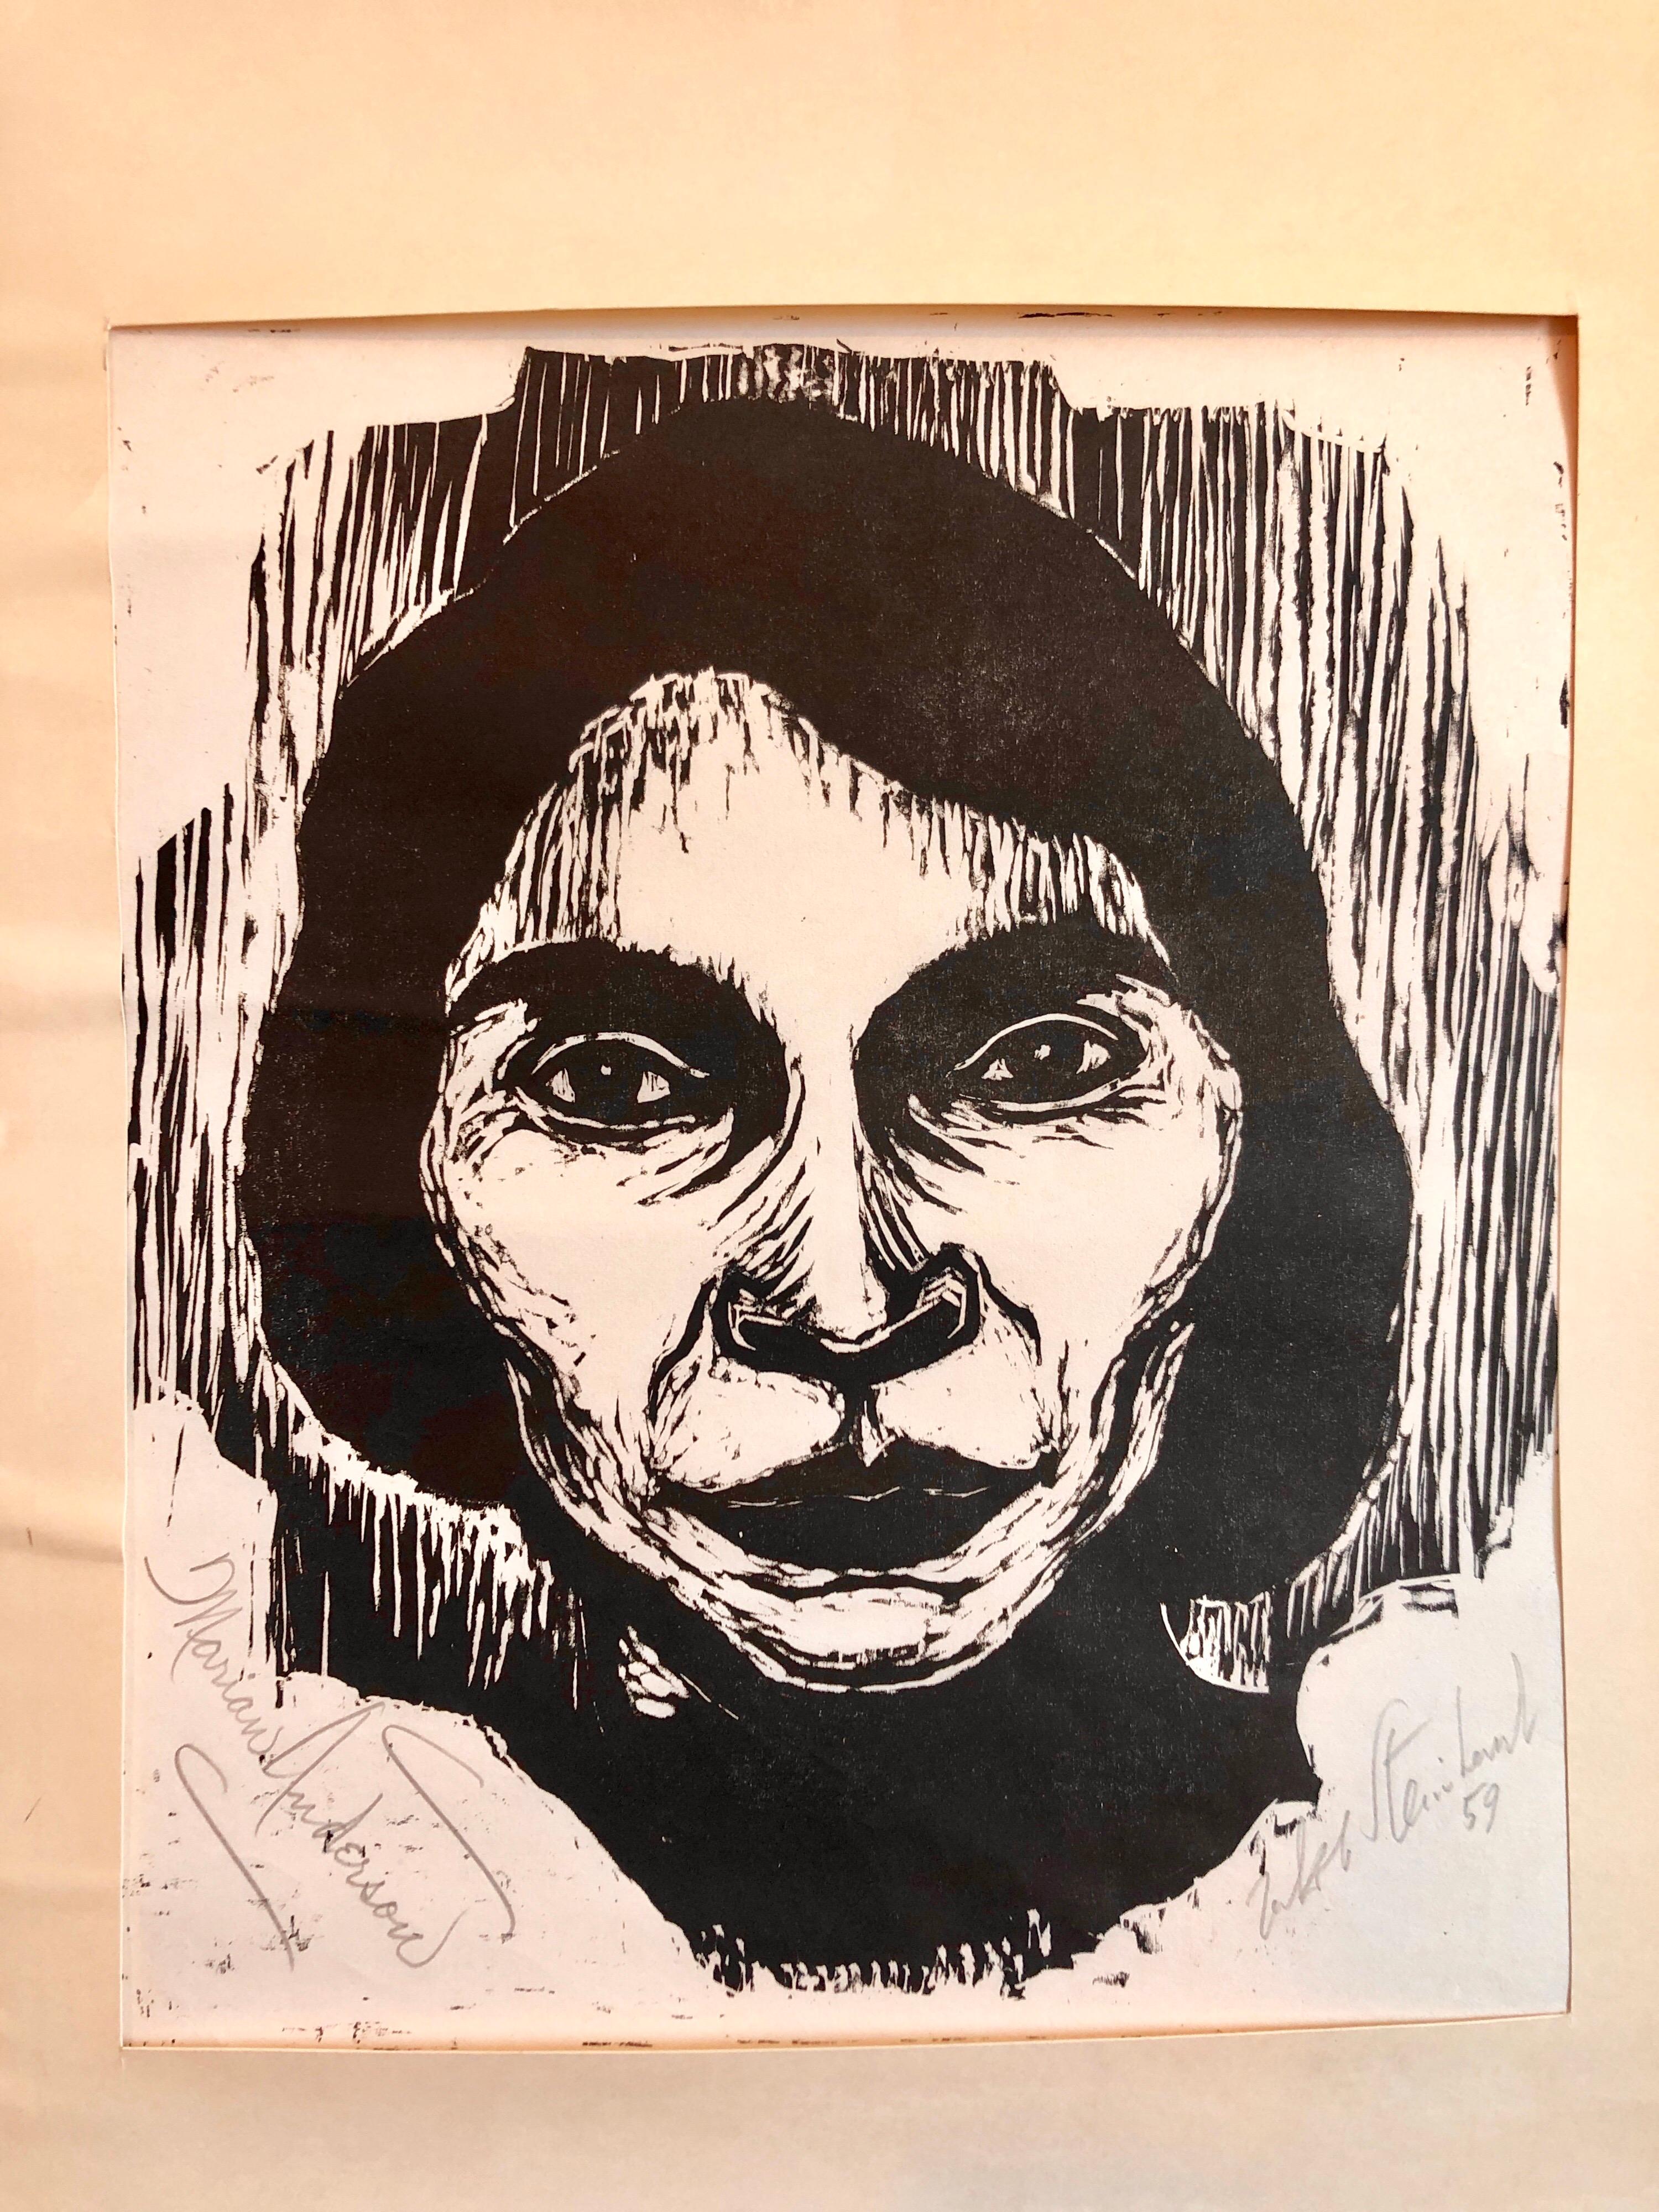 Portrait in black and white, woodblock print. Pencil signed by both Jacob  Steinhardt  1887-1968 and Marian Anderson. Very rare thus. (Commissioned by Dr. Leon Kolb, San Francisco)
35.8 x 23.6 cm (image)
Marian Anderson is remembered as one of the